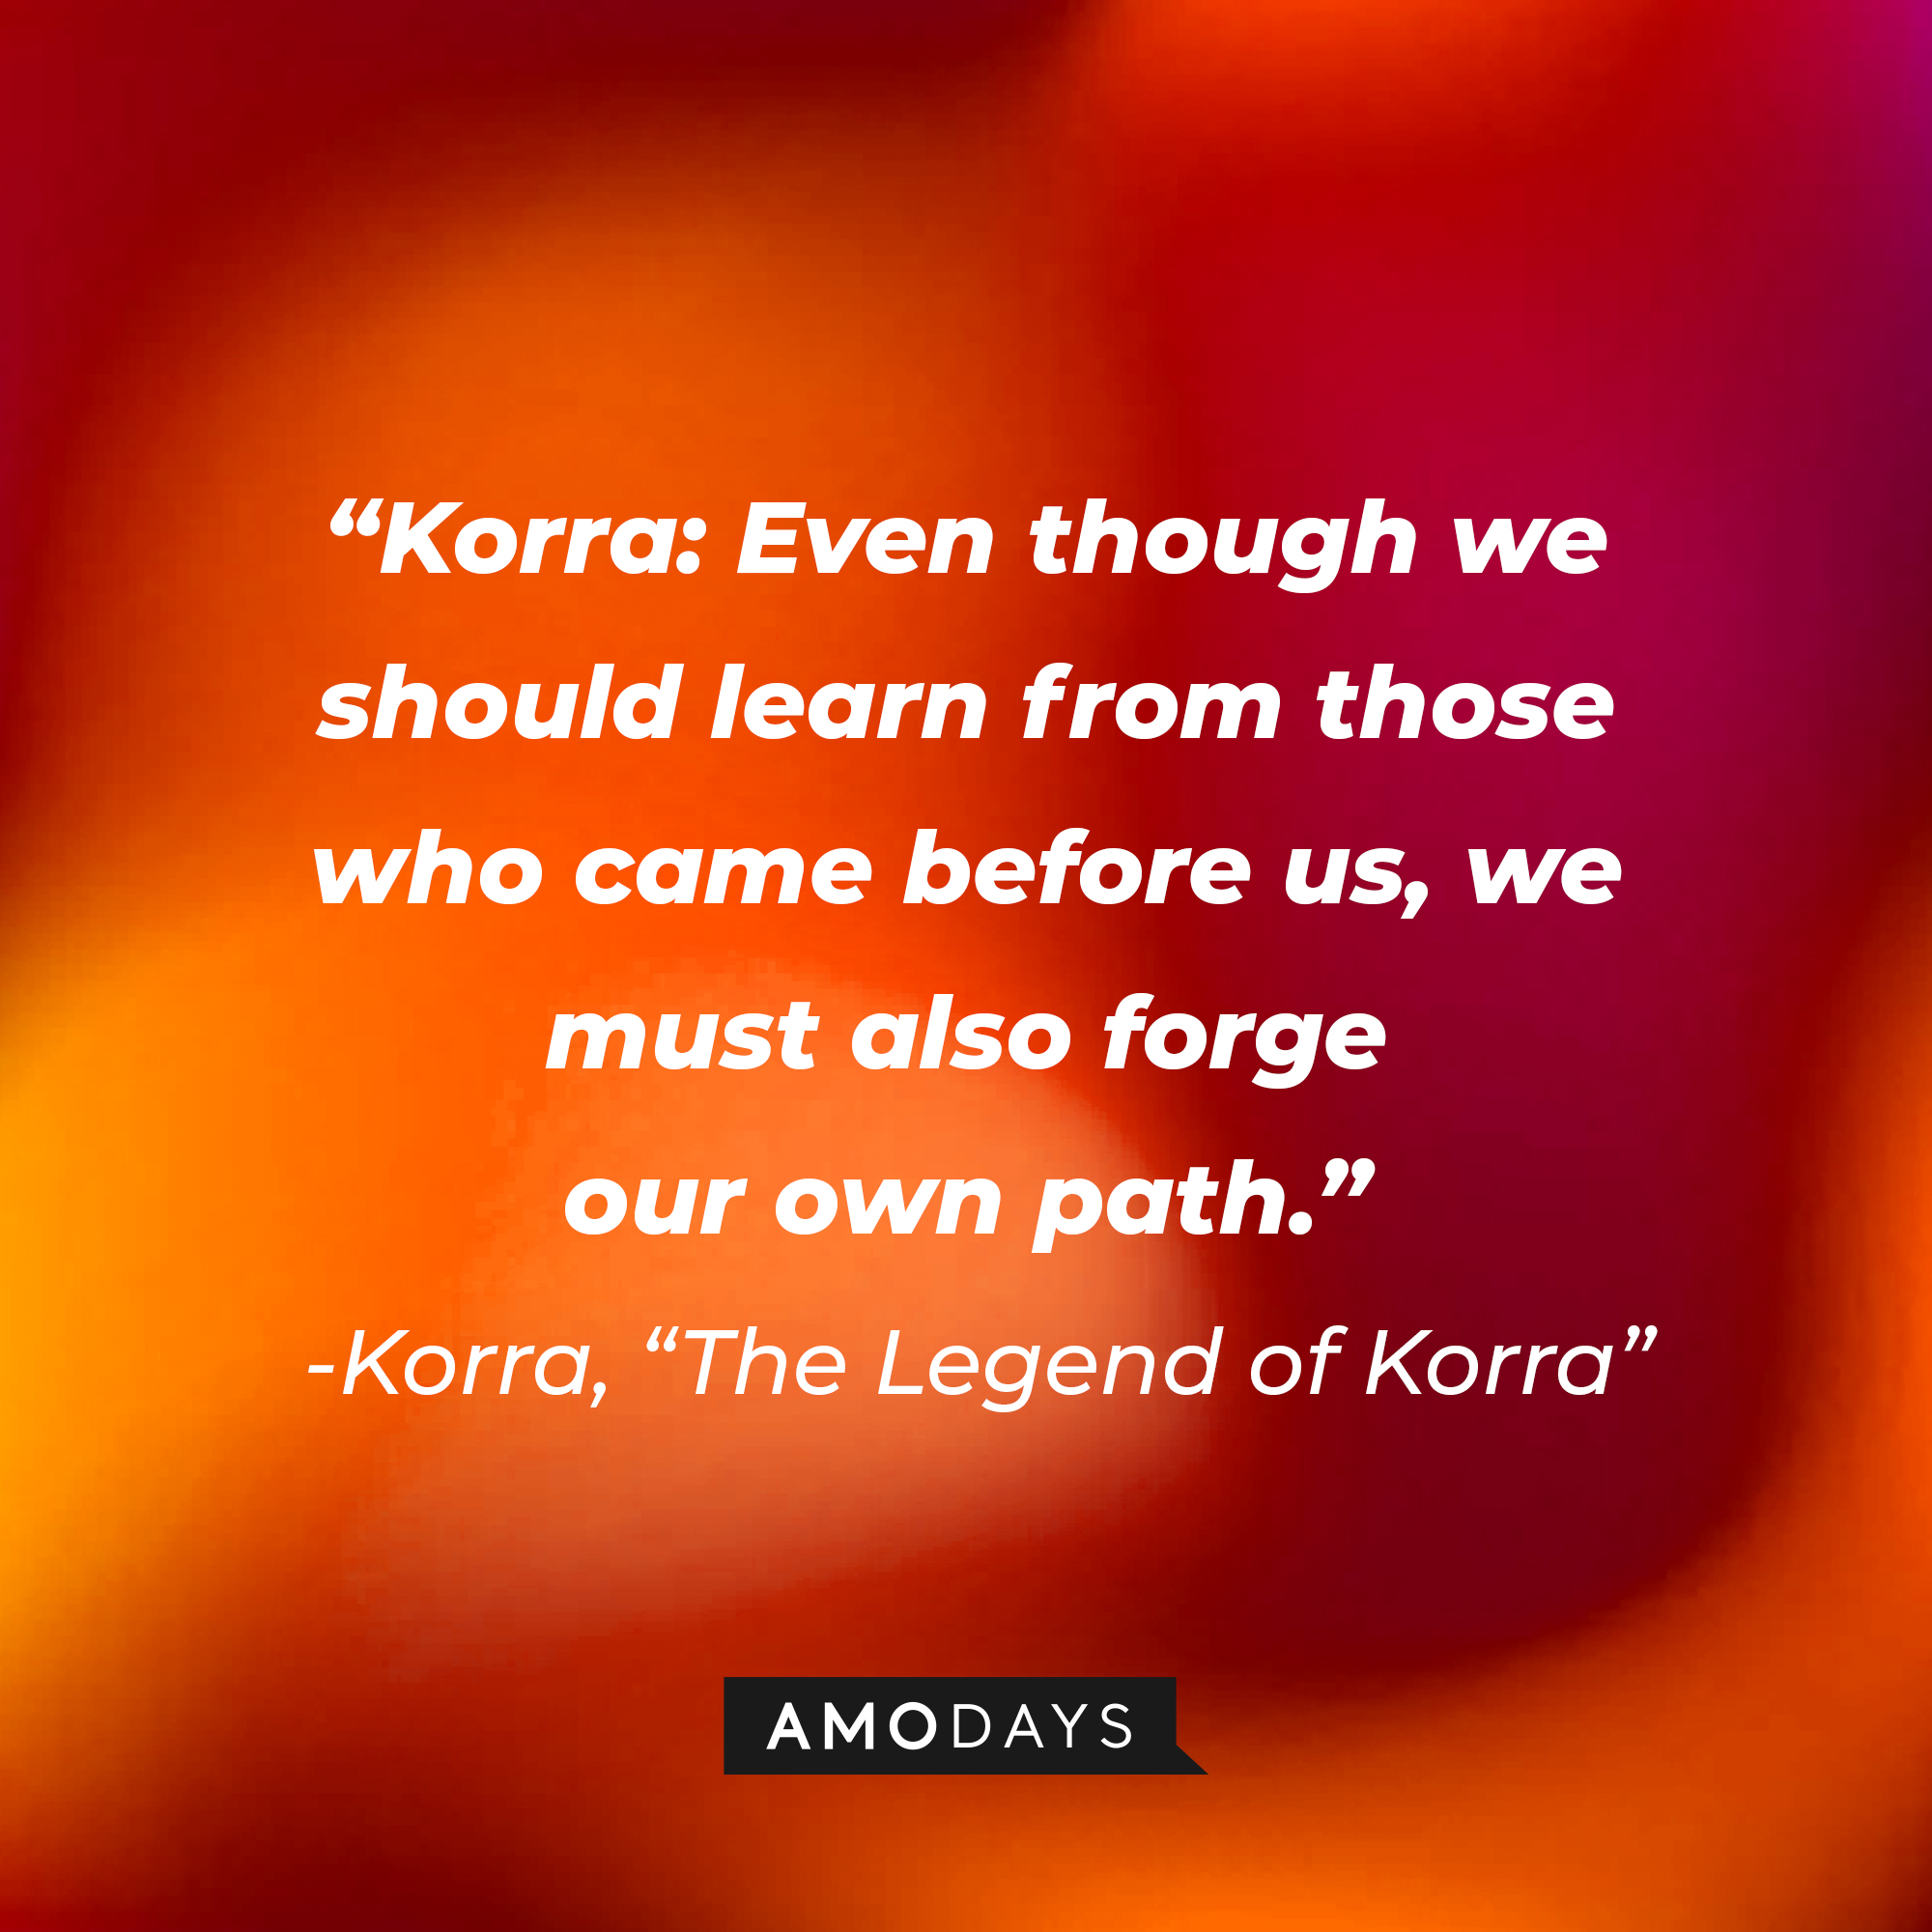 Korra’s quote in “Avatar: The Legend of Korra:” “Even though we should learn from those who came before us, we must also forge our own path." | Source: Amodays